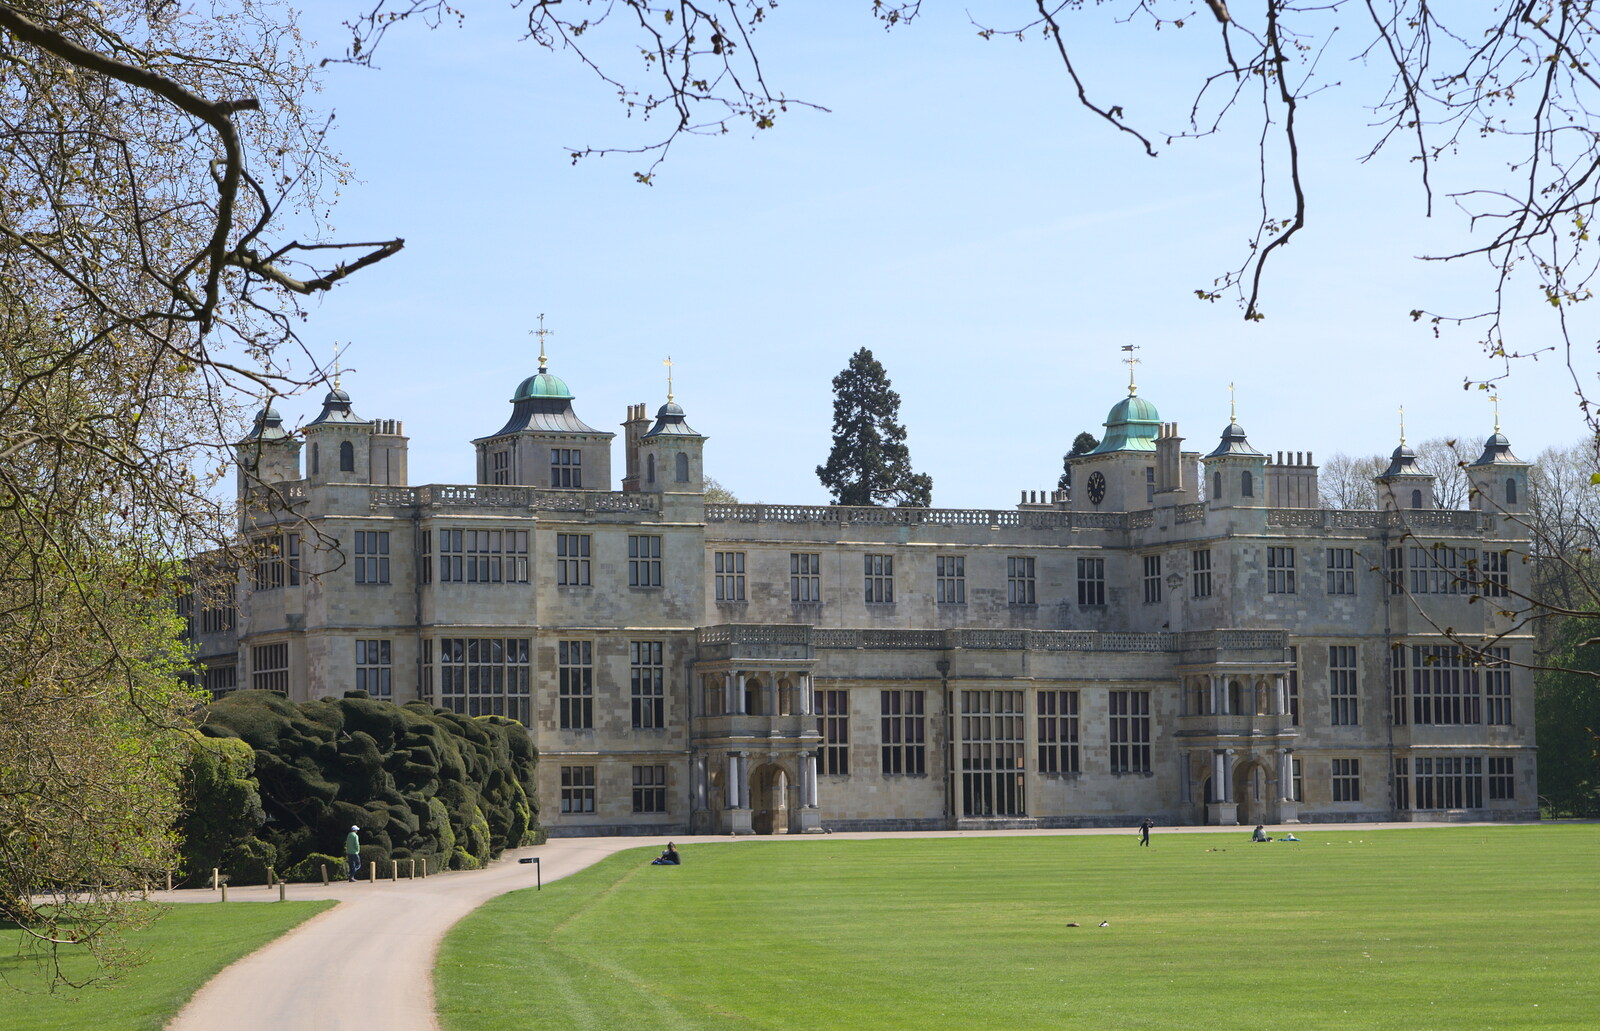 The front of Audley End from A Trip to Audley End House, Saffron Walden, Essex - 16th April 2014